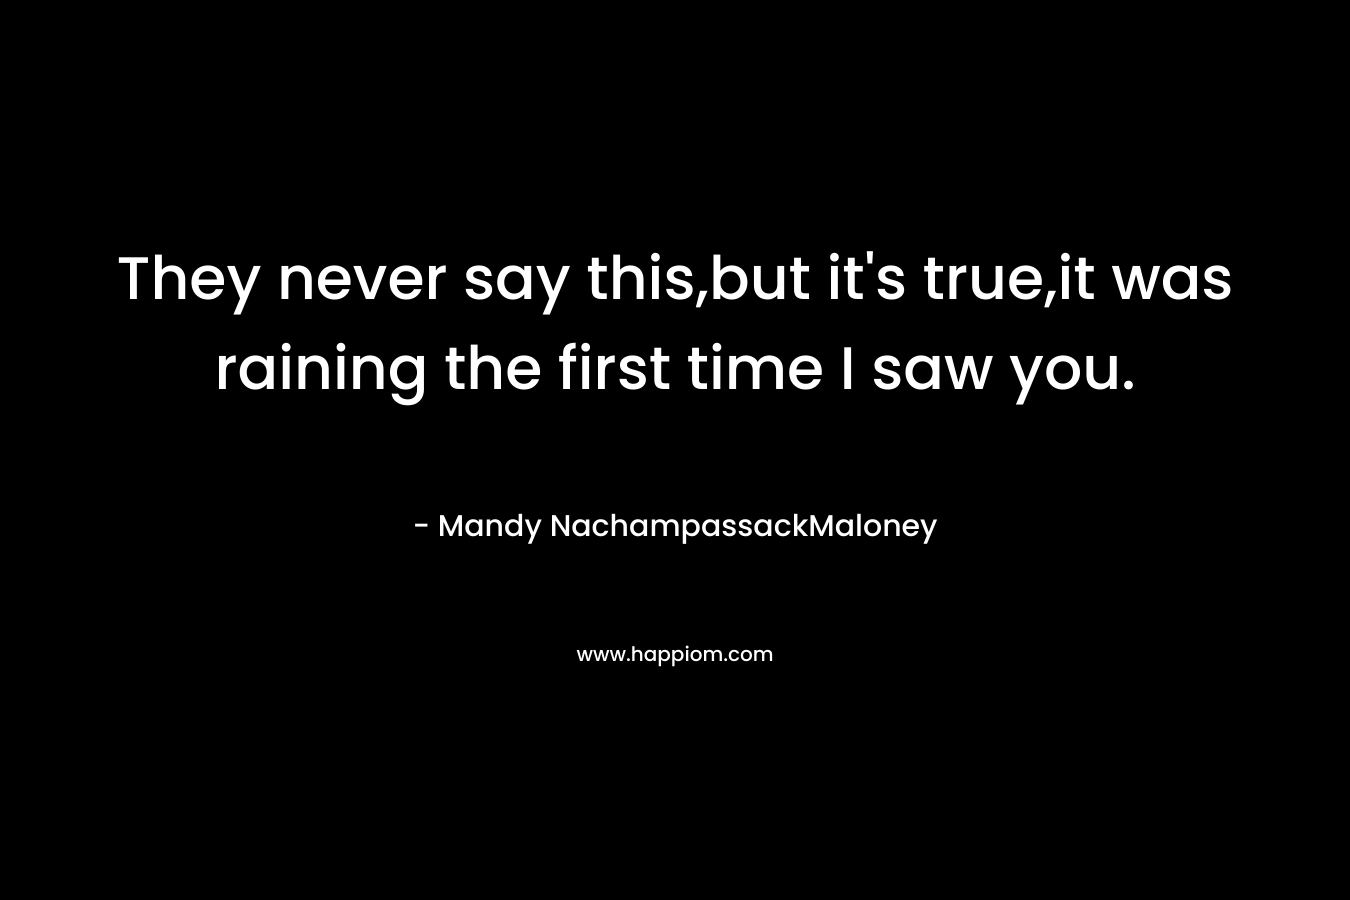 They never say this,but it’s true,it was raining the first time I saw you. – Mandy NachampassackMaloney